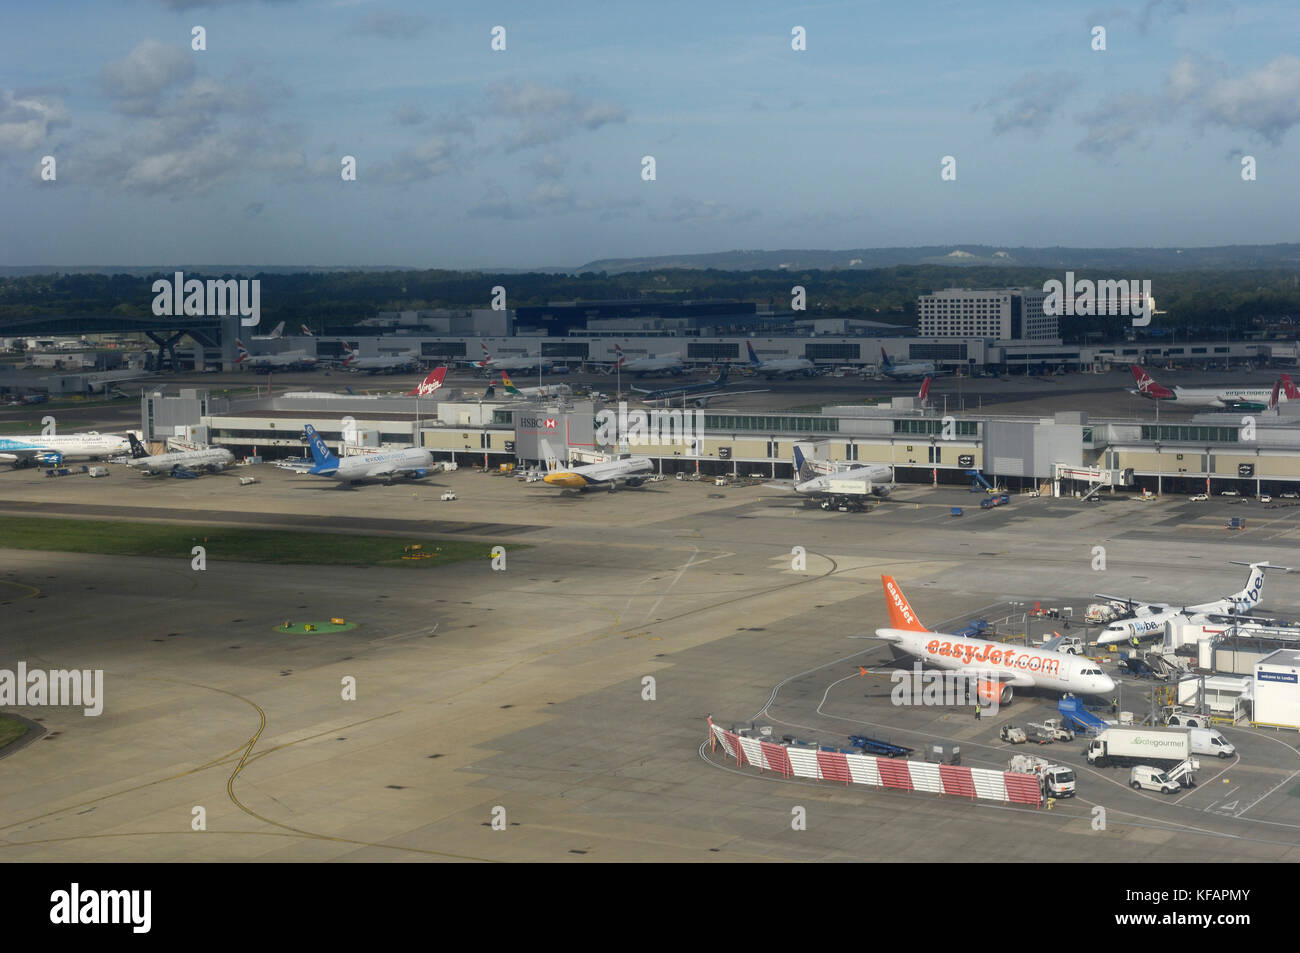 easyJet Airbus A319-100 parked on the South Terminal with the North Terminal and Hotel Sofitel behind Stock Photo